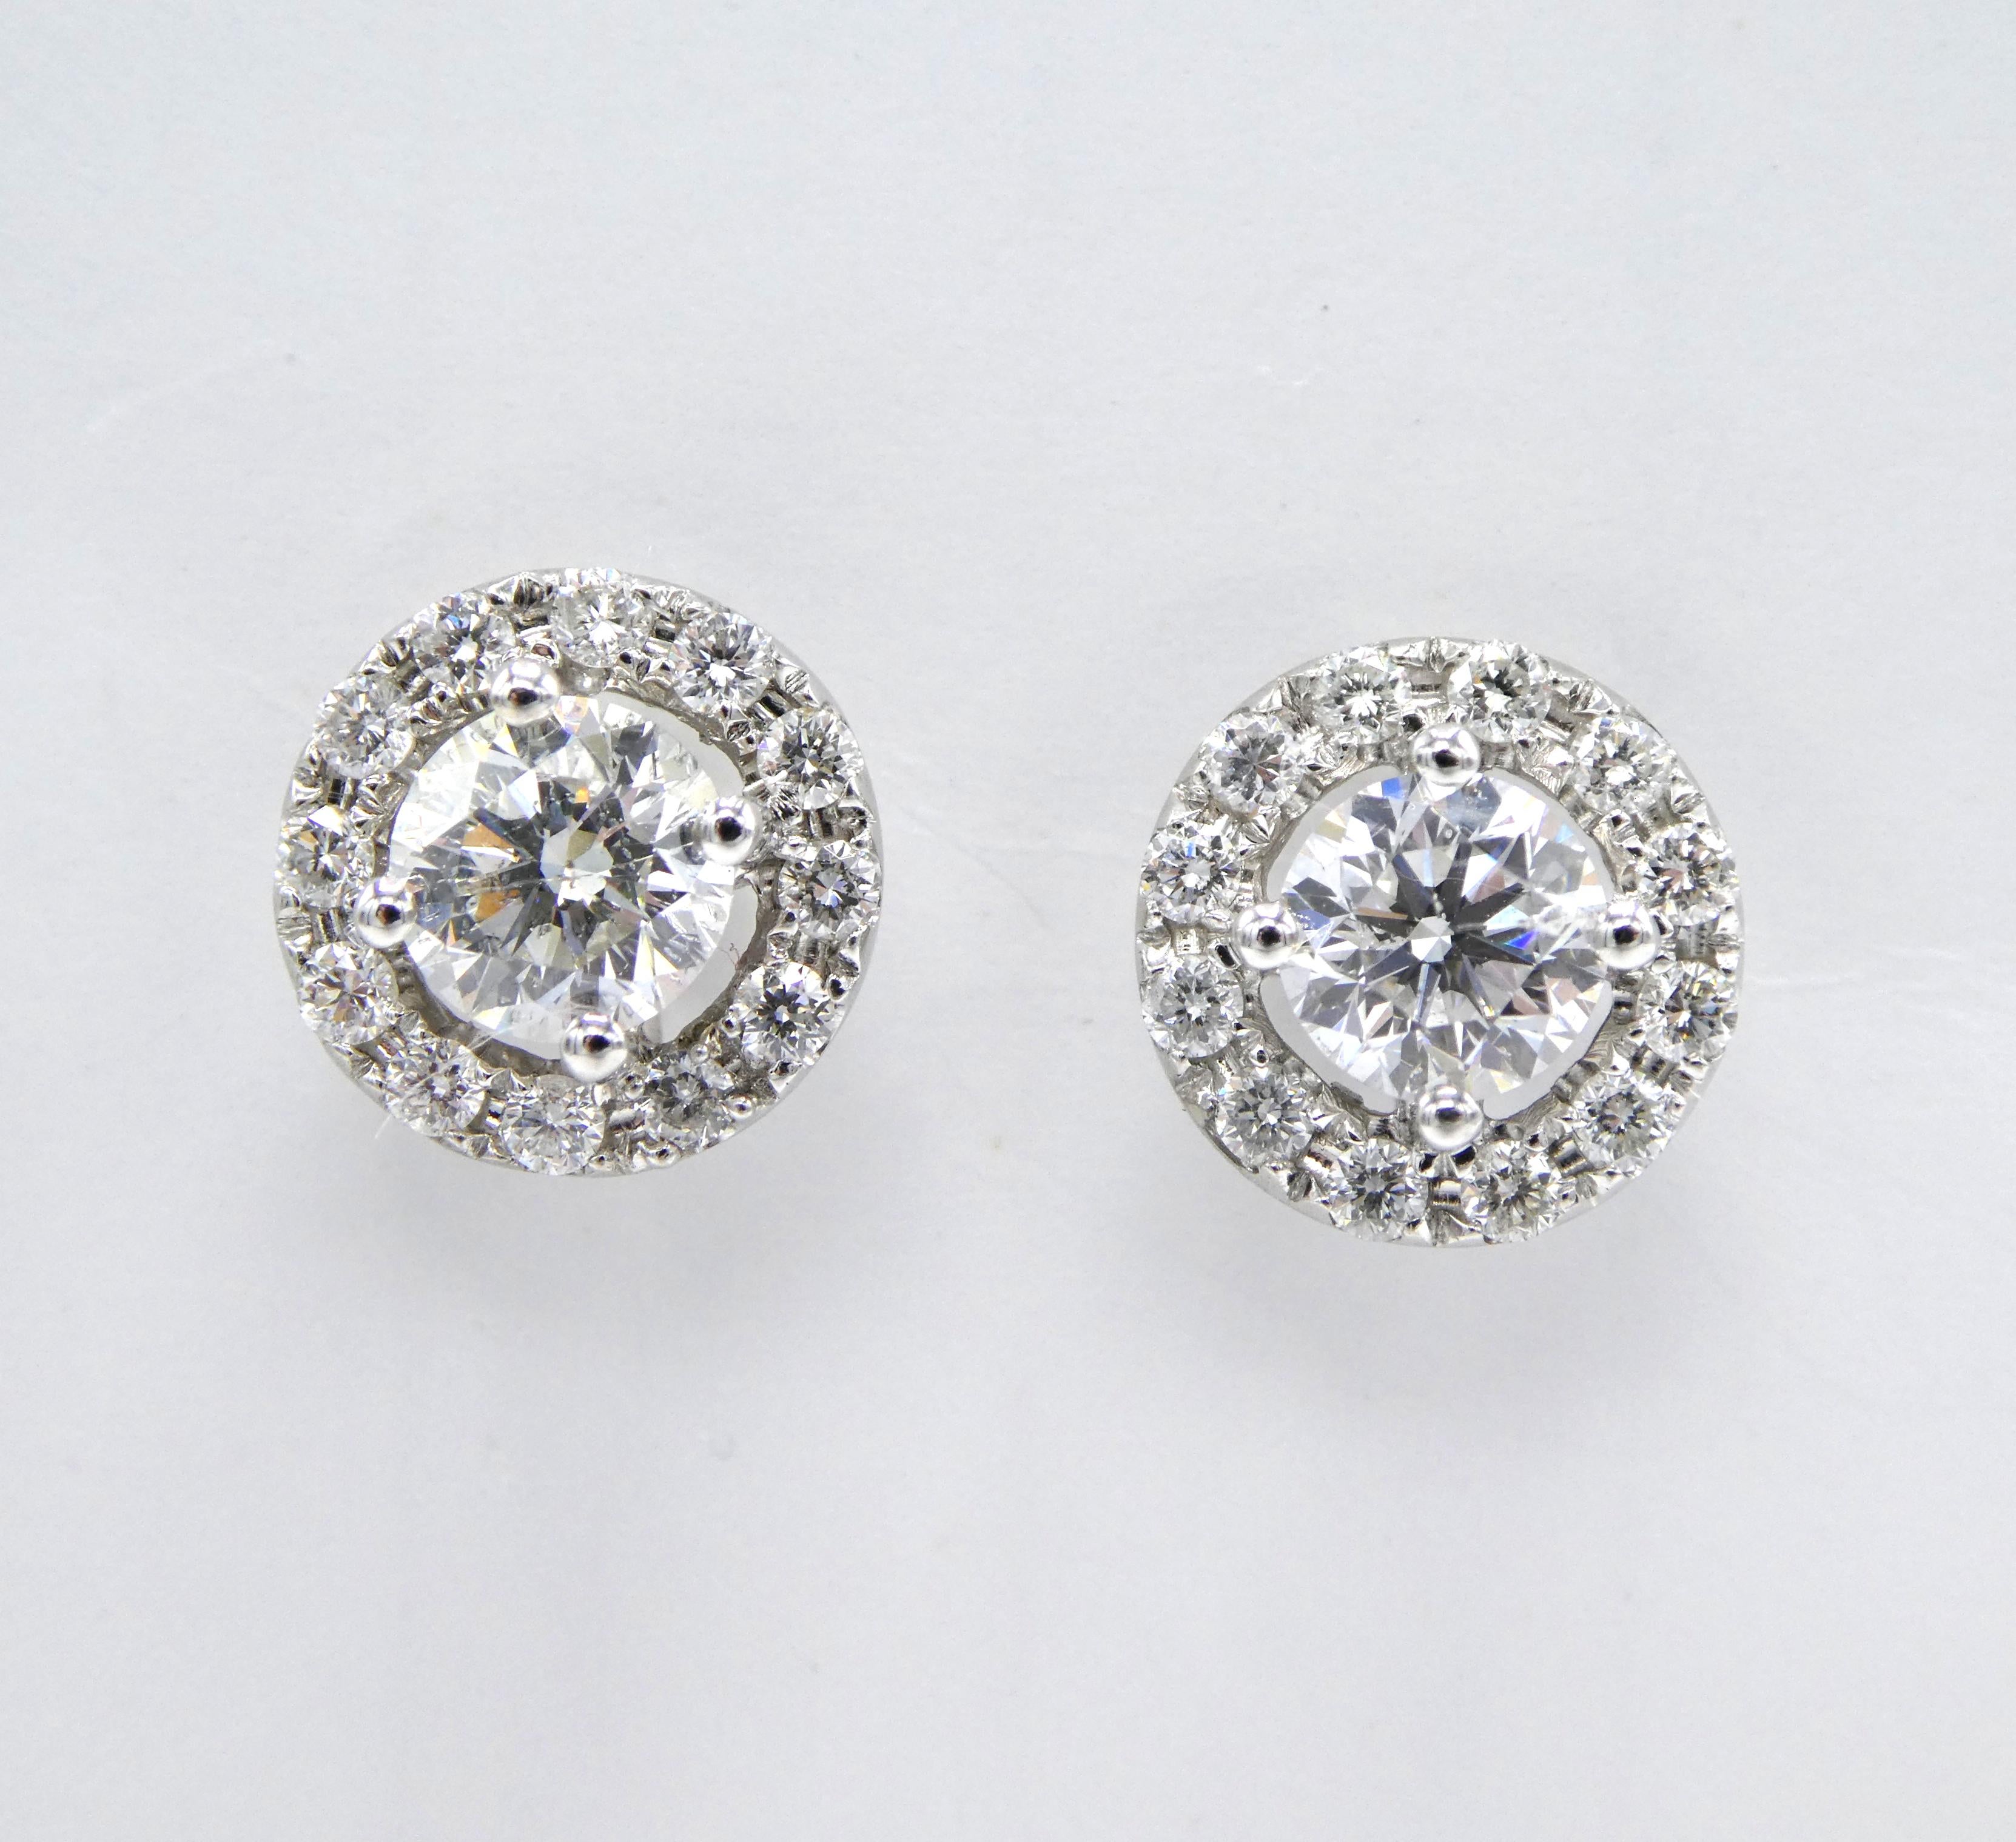 Vintage 14K White Gold Diamond Halo Stud Earrings 1.15CTW

Metal: 14k white gold
Weight: 2.94 grams
Diamonds: 2 center diamonds measure 4.7mm (approx. 1/2 carat each), H SI, 24 round brilliant diamonds surrounding, totaling approx. 1.15 CTW H SI